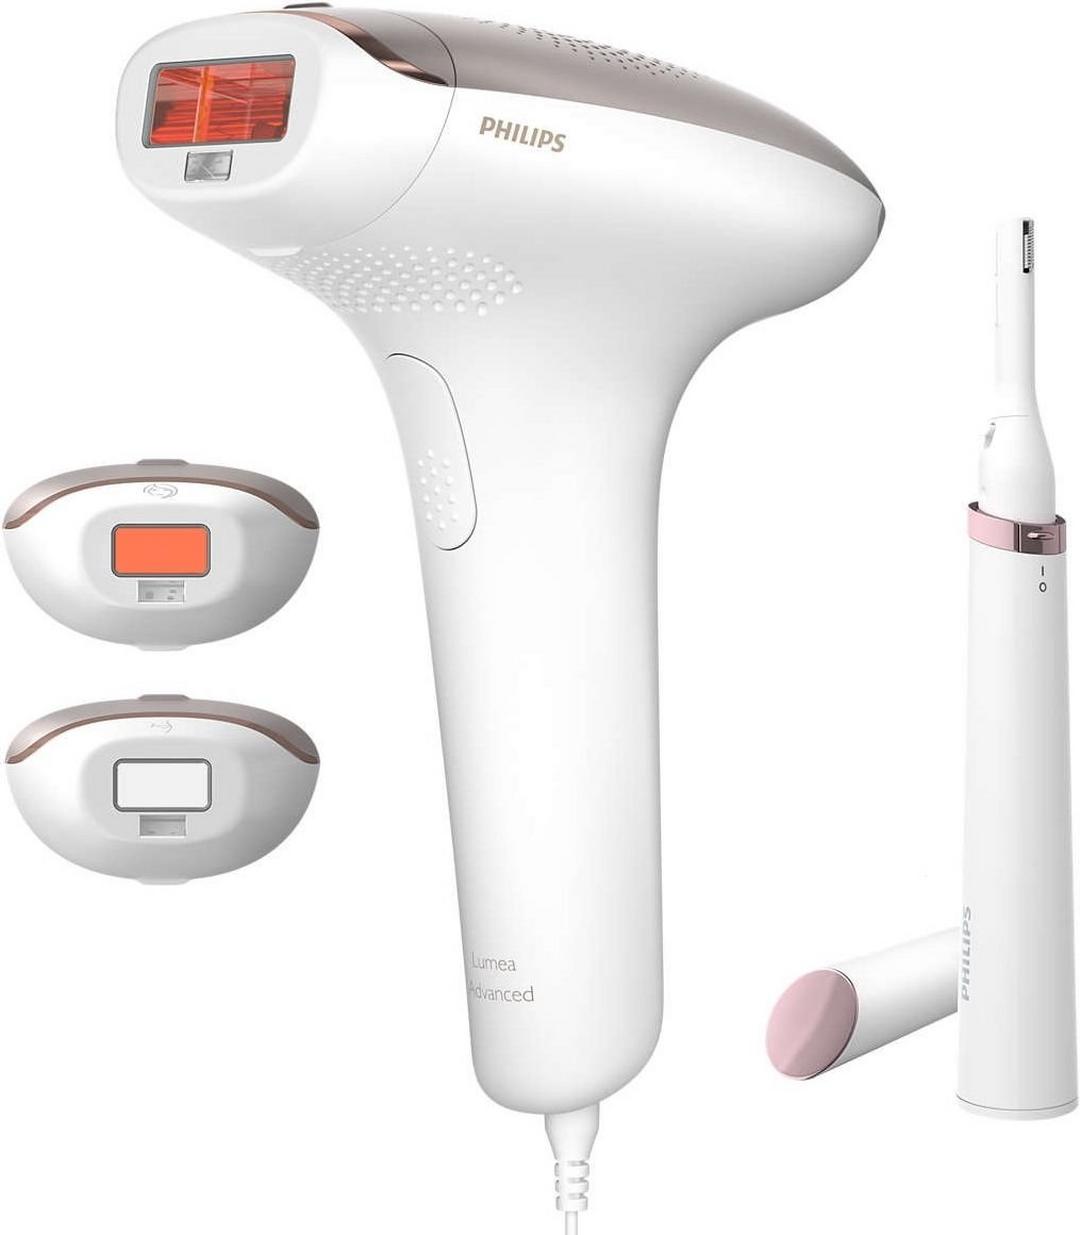 Philips Lumea IPL 7000 Series Hair-Free Smooth Skin with Satin Compact Pen Trimmer, Corded, 3 Attachement, BRI923/60 - White